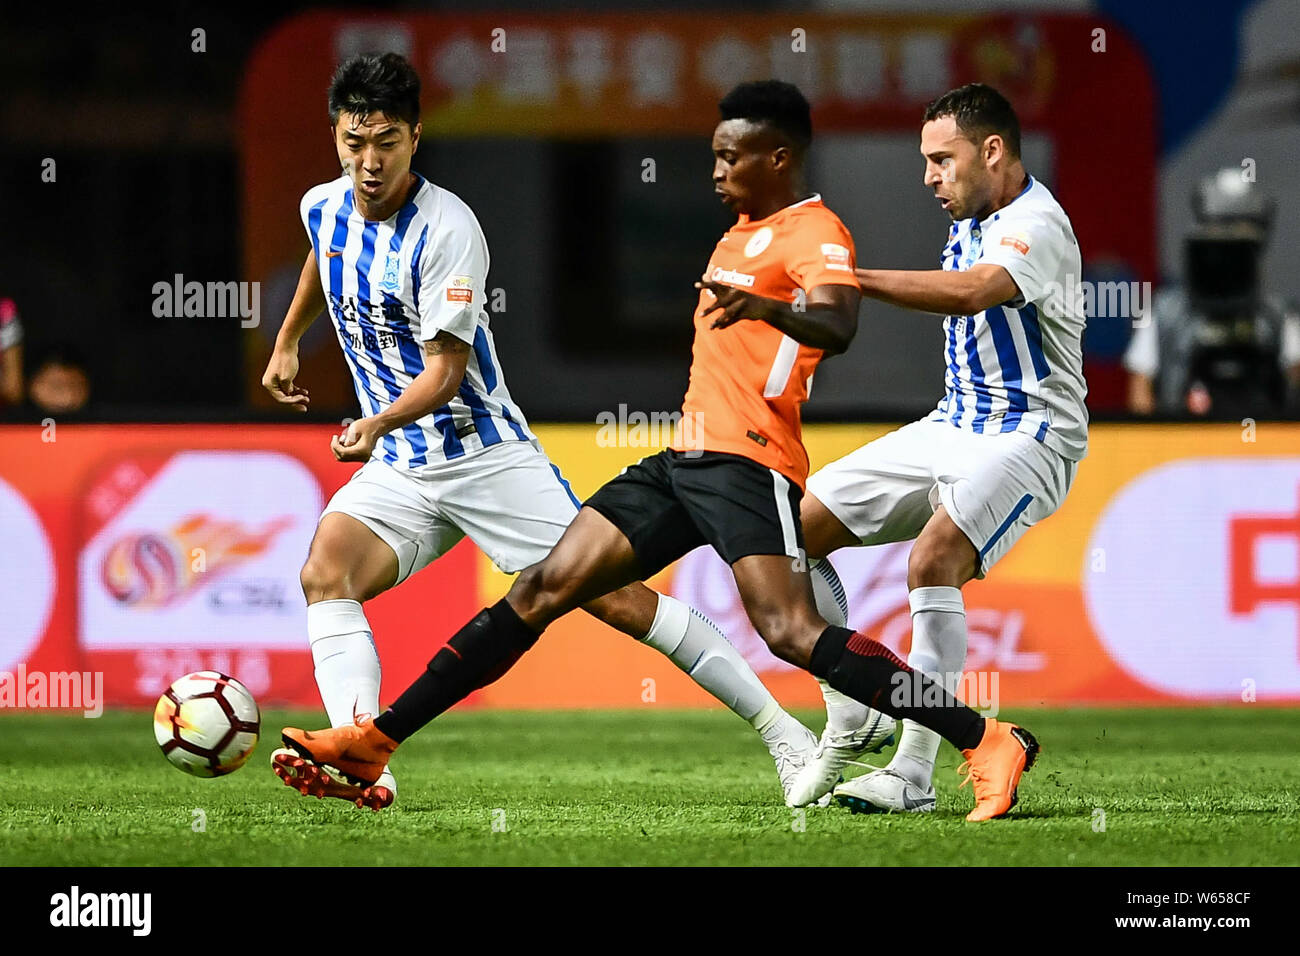 Serbian football player Dusko Tosic, right, of Guangzhou R&F challenges Cameroonian football player Benjamin Moukandjo of Beijing Renhe in their 15th Stock Photo